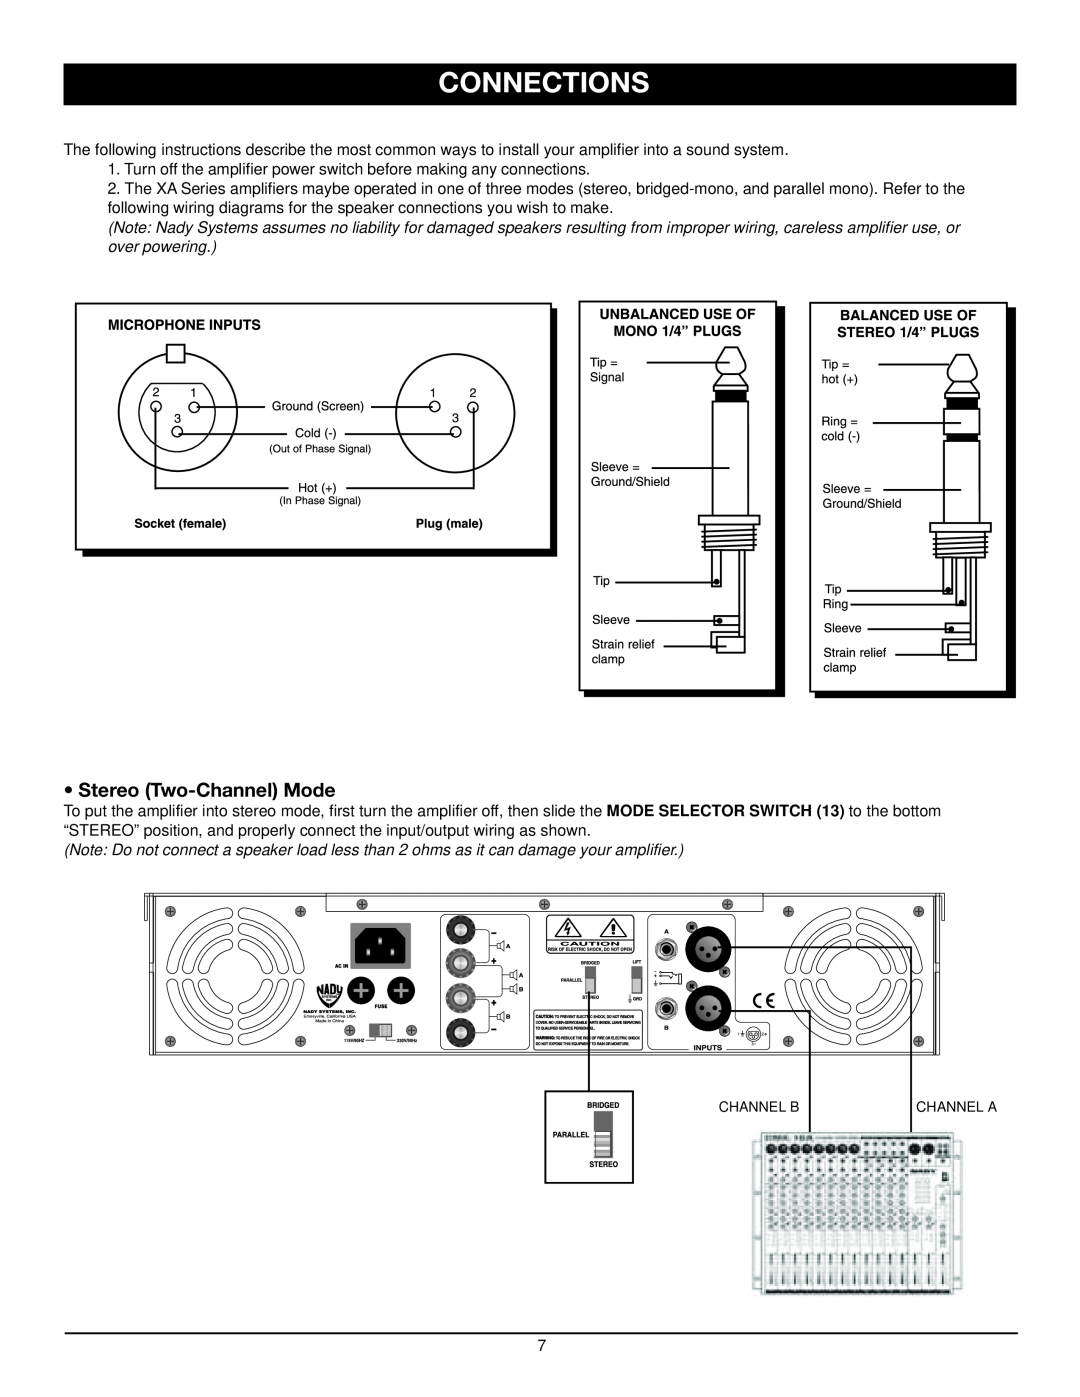 Nady Systems XA owner manual Connections, Stereo Two-ChannelMode 